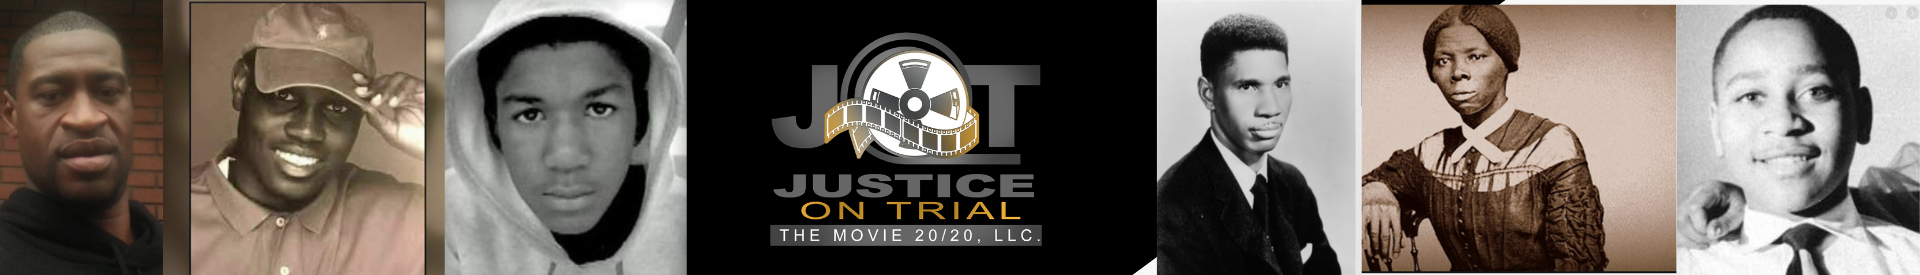 JUSTICE ON TRIAL 